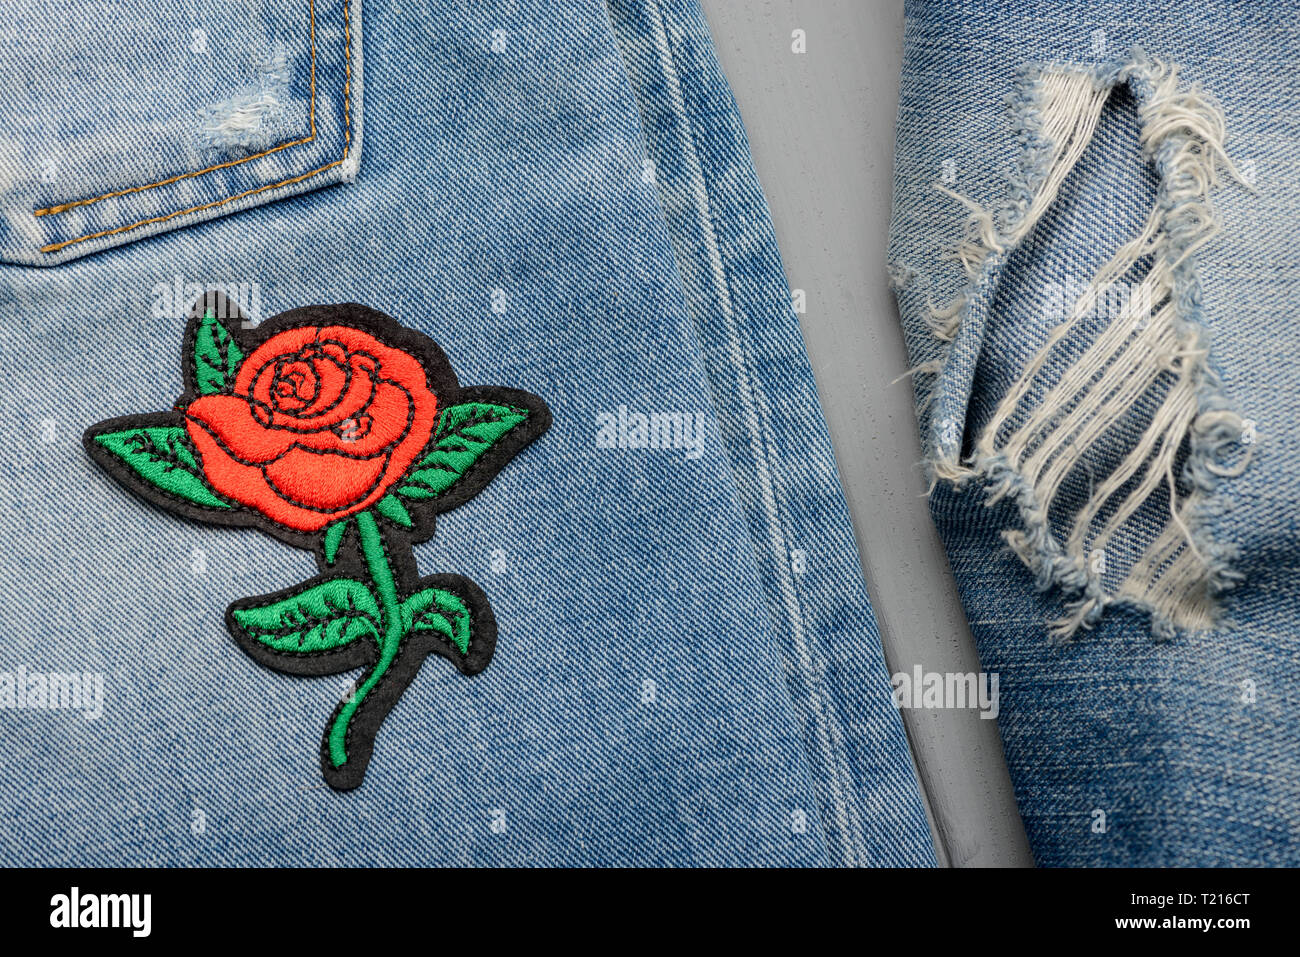 Red rose embroidered patch Stock Photo - Alamy